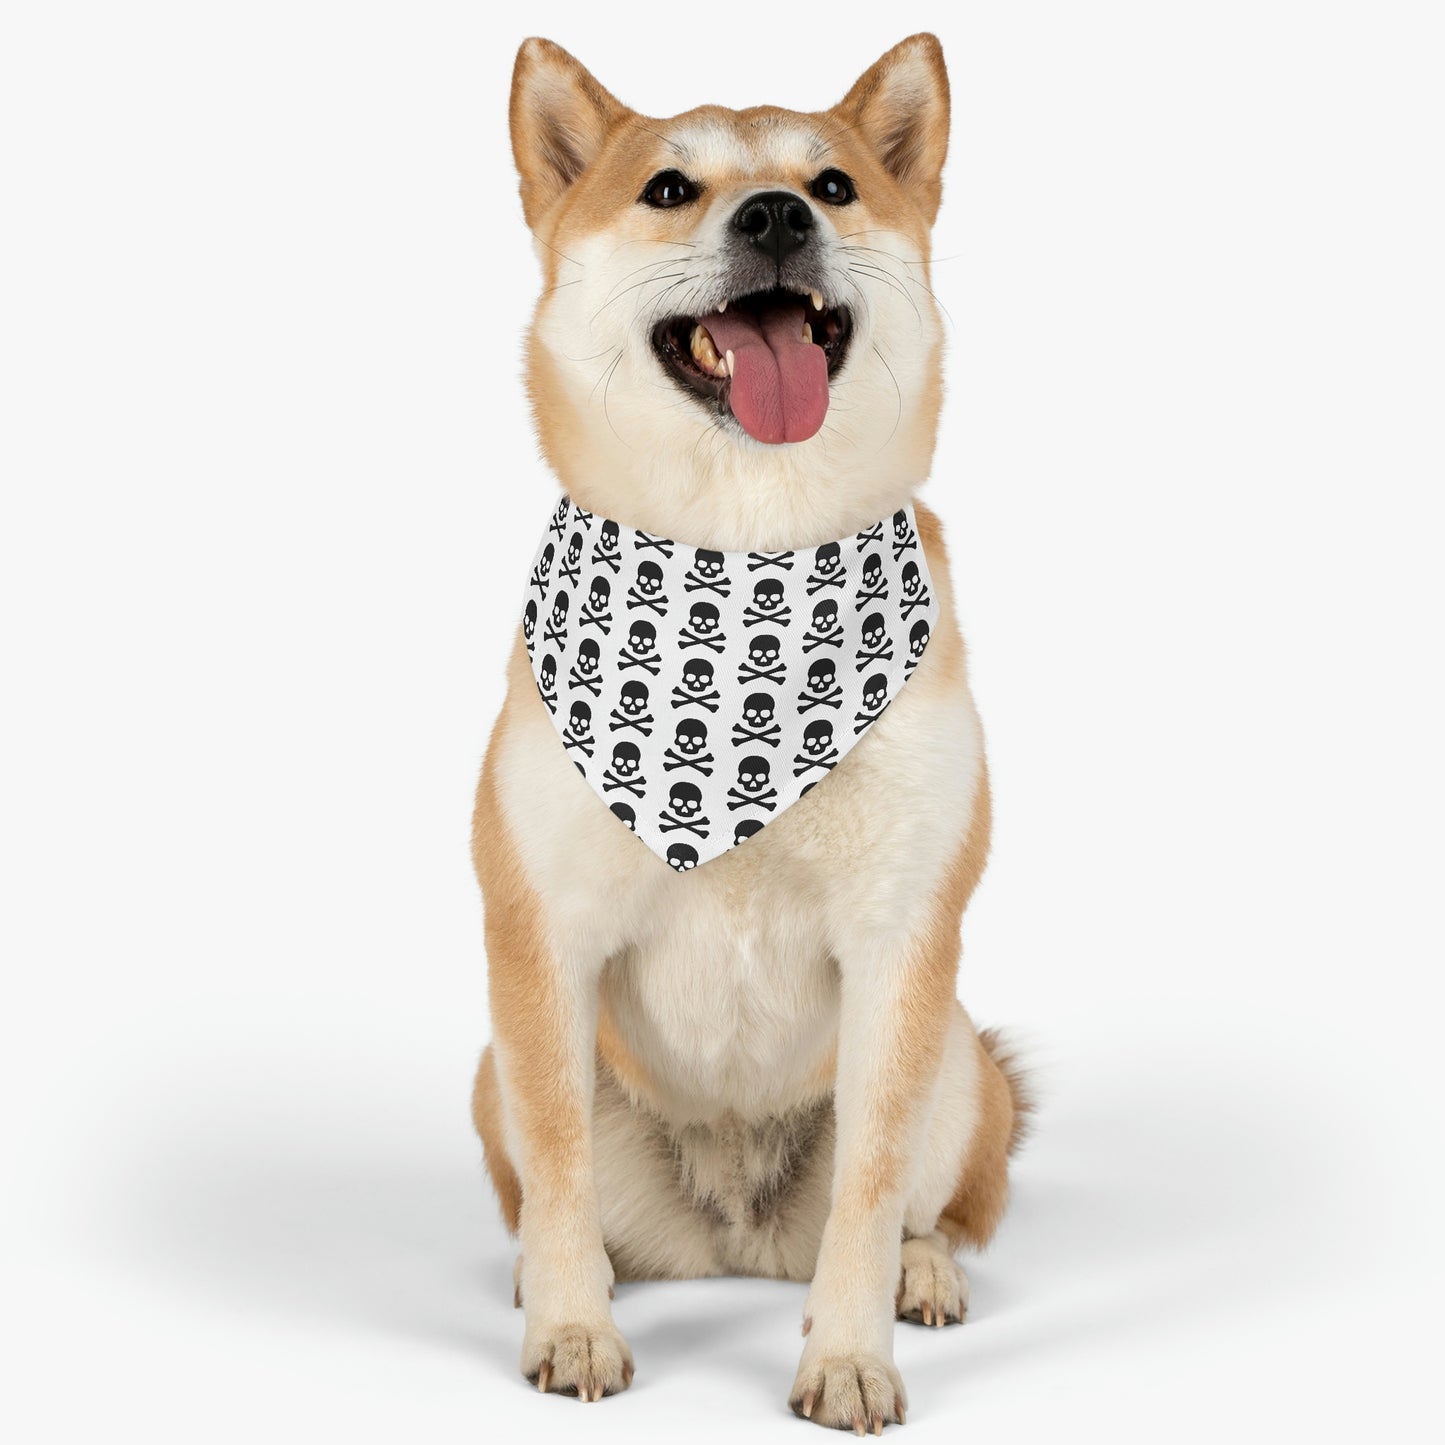 A dog with a bandana covered in Jolly Roger skulls